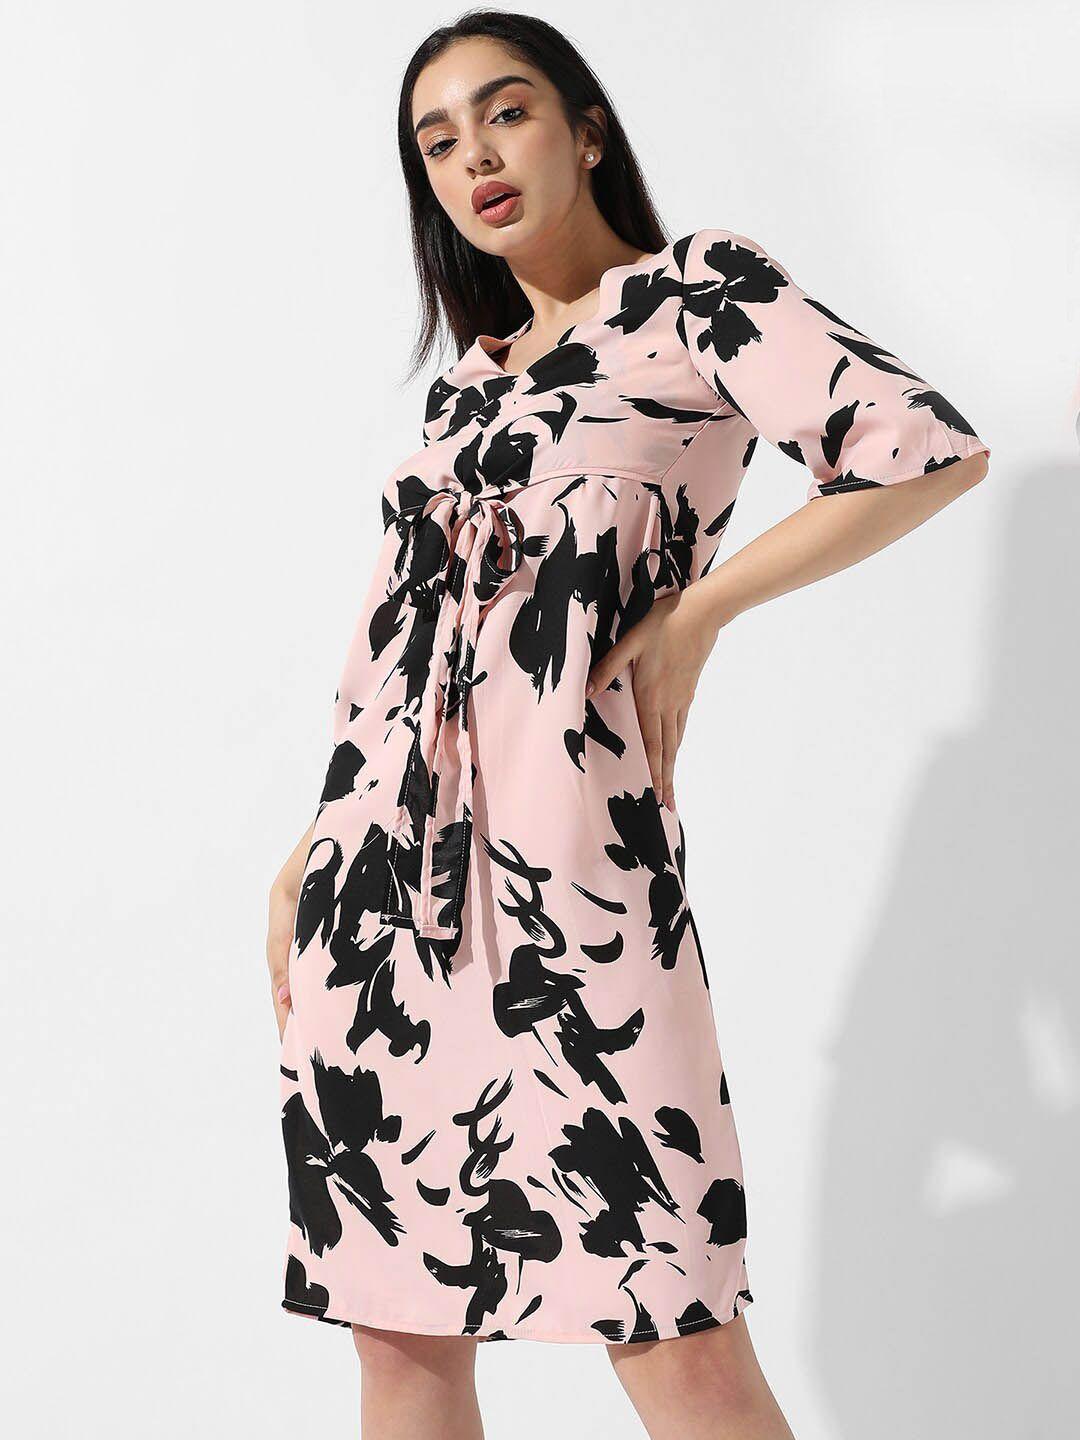 campus-sutra-floral-print-empire-dress